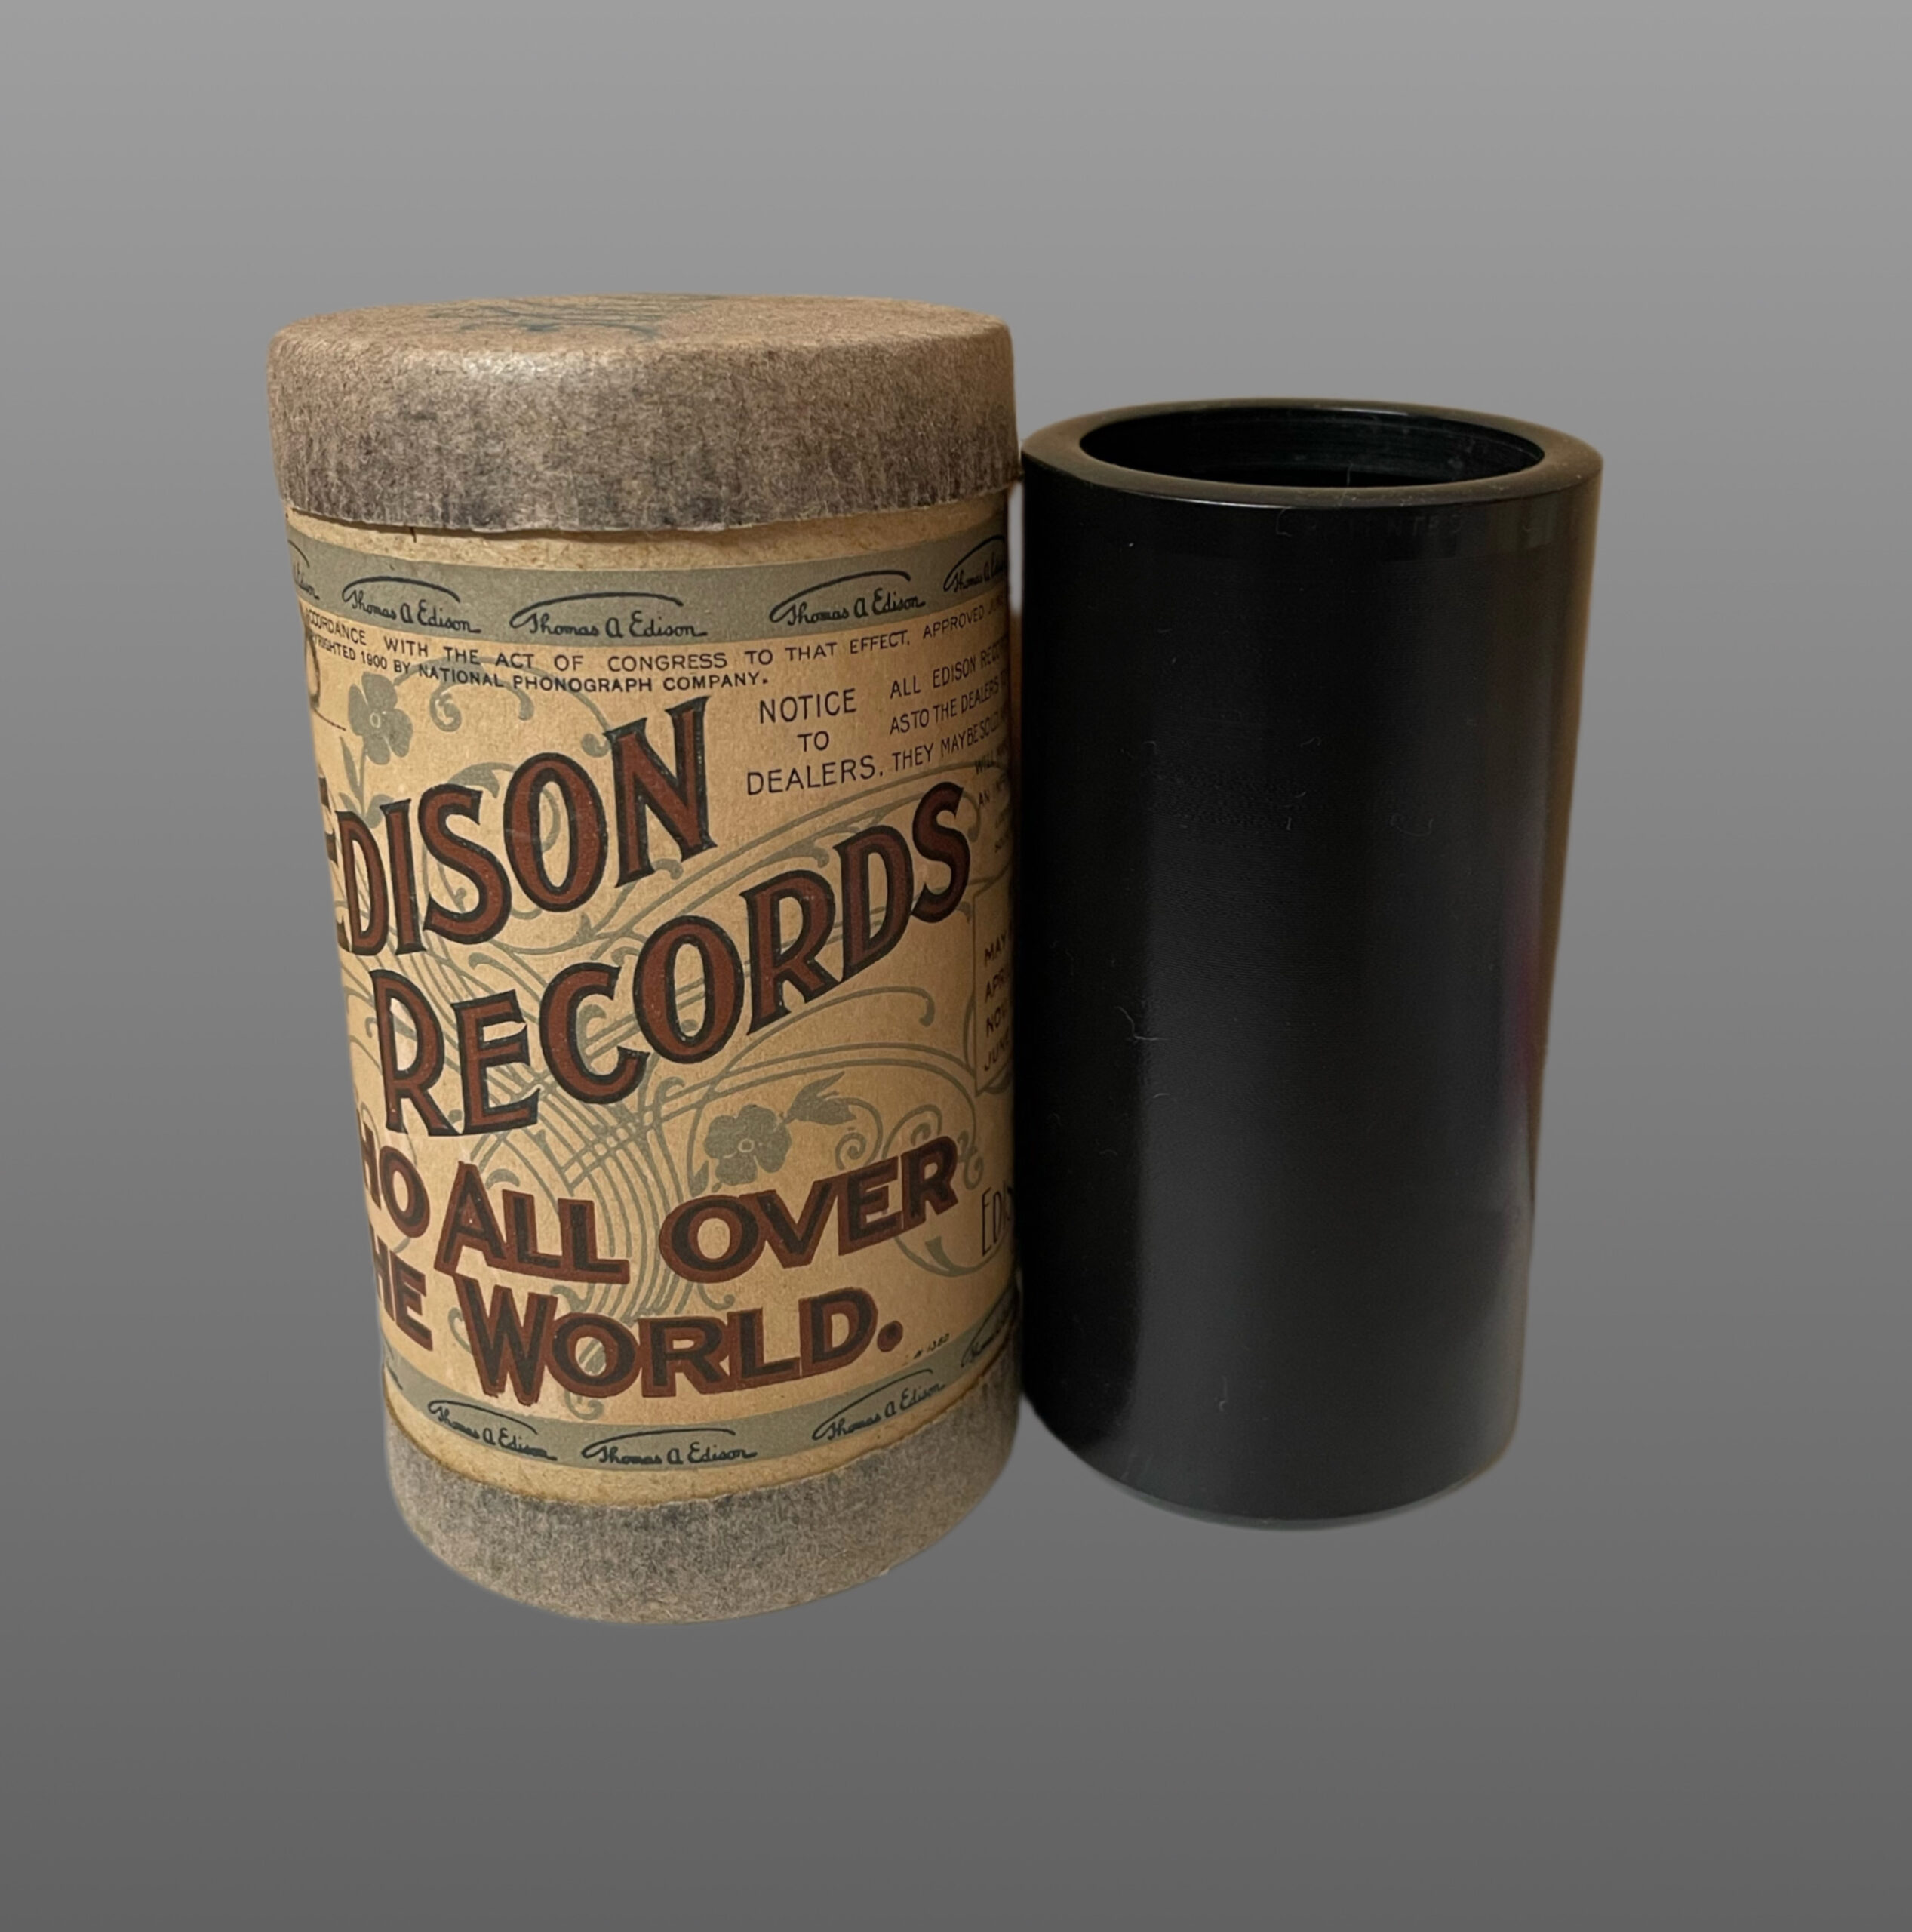 Edison 2-minute Cylinder…”I’m afraid to Come Home in the Dark”